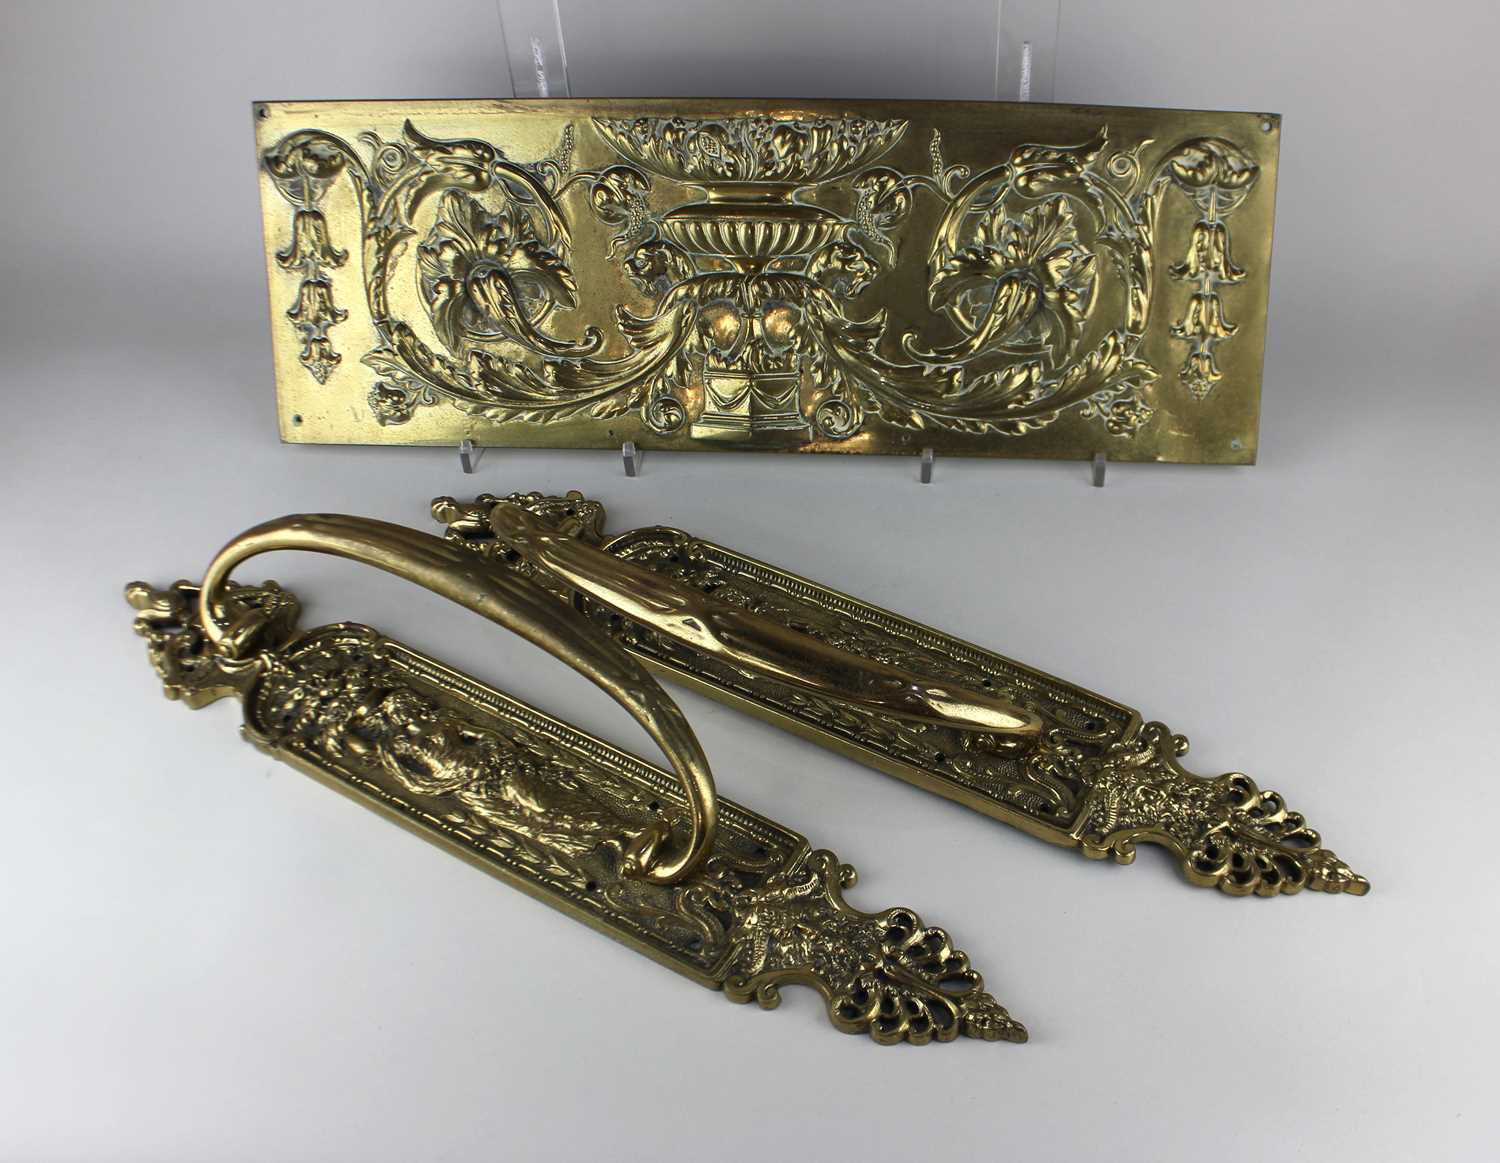 A pair of large brass door handles decorated with a classical figure holding a basket of flowers